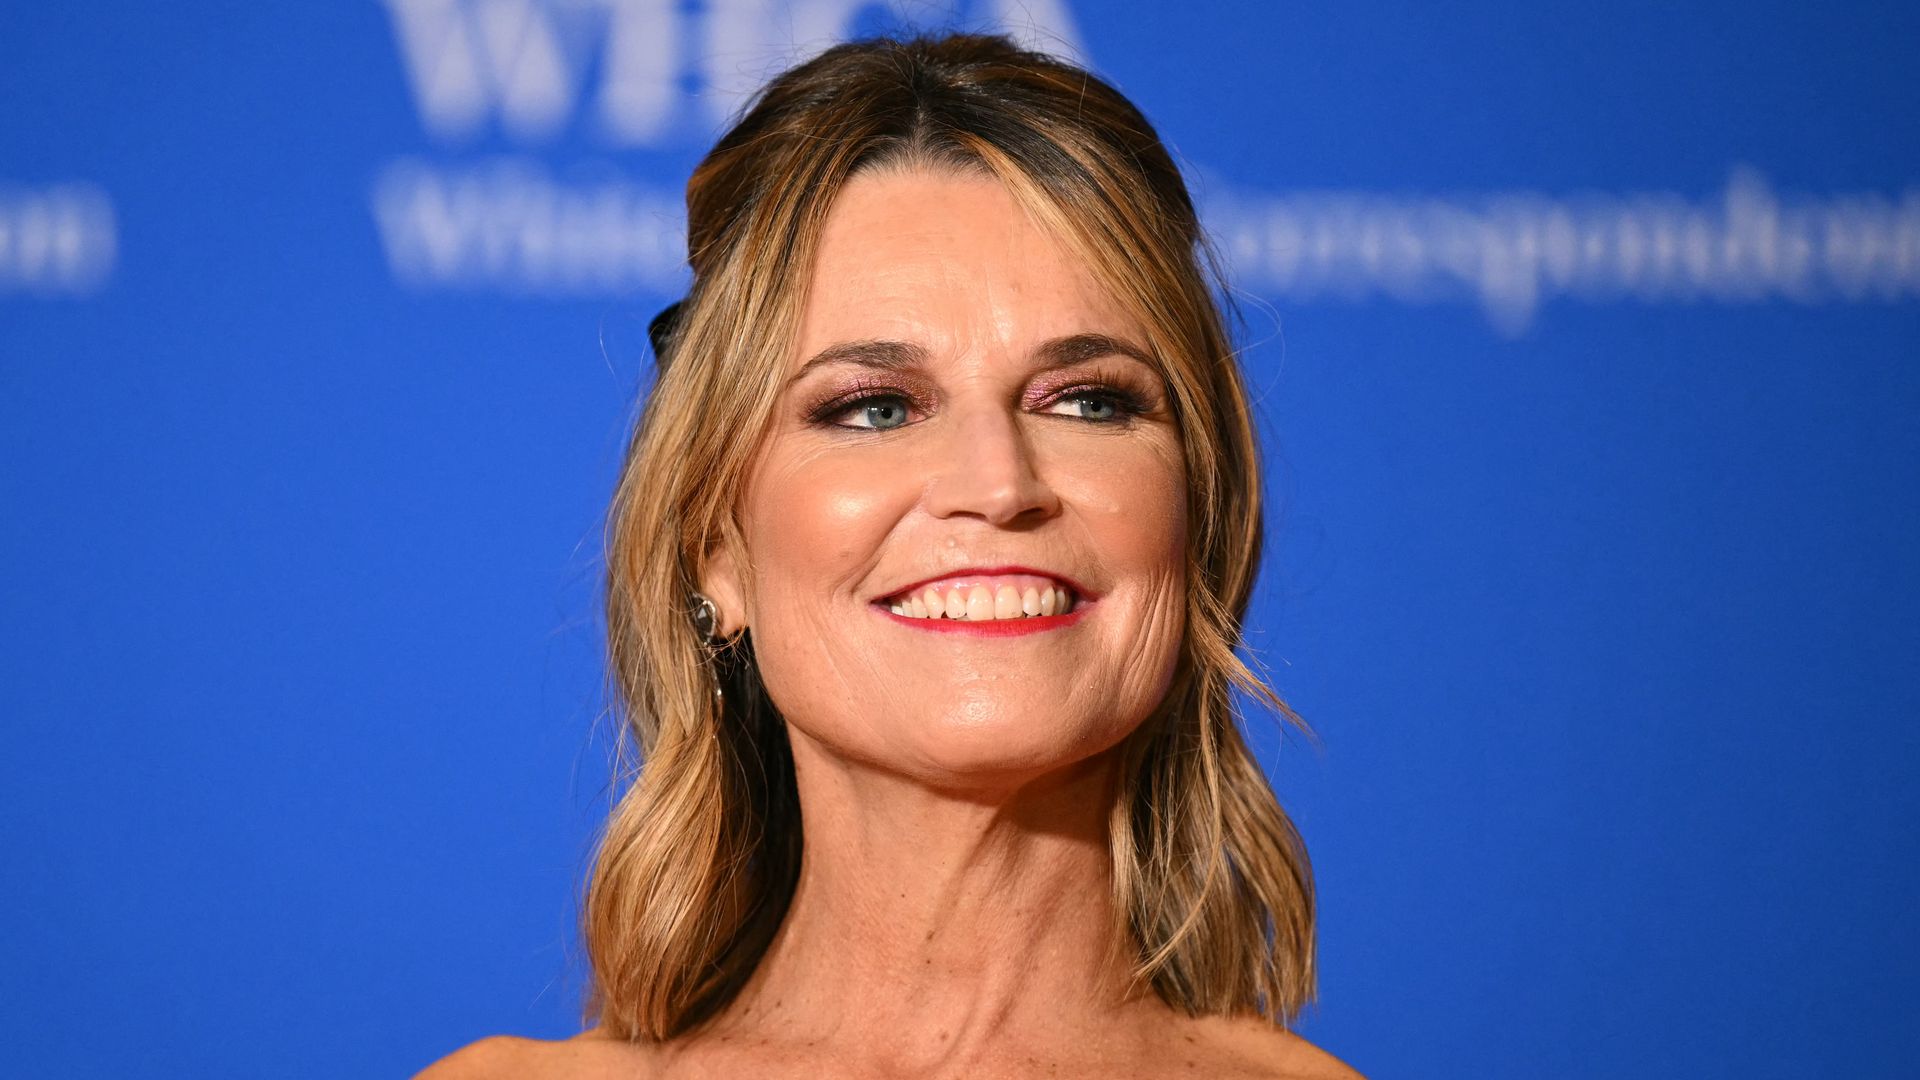 Savannah Guthrie's change to her appearance leaves Today Show fans in awe